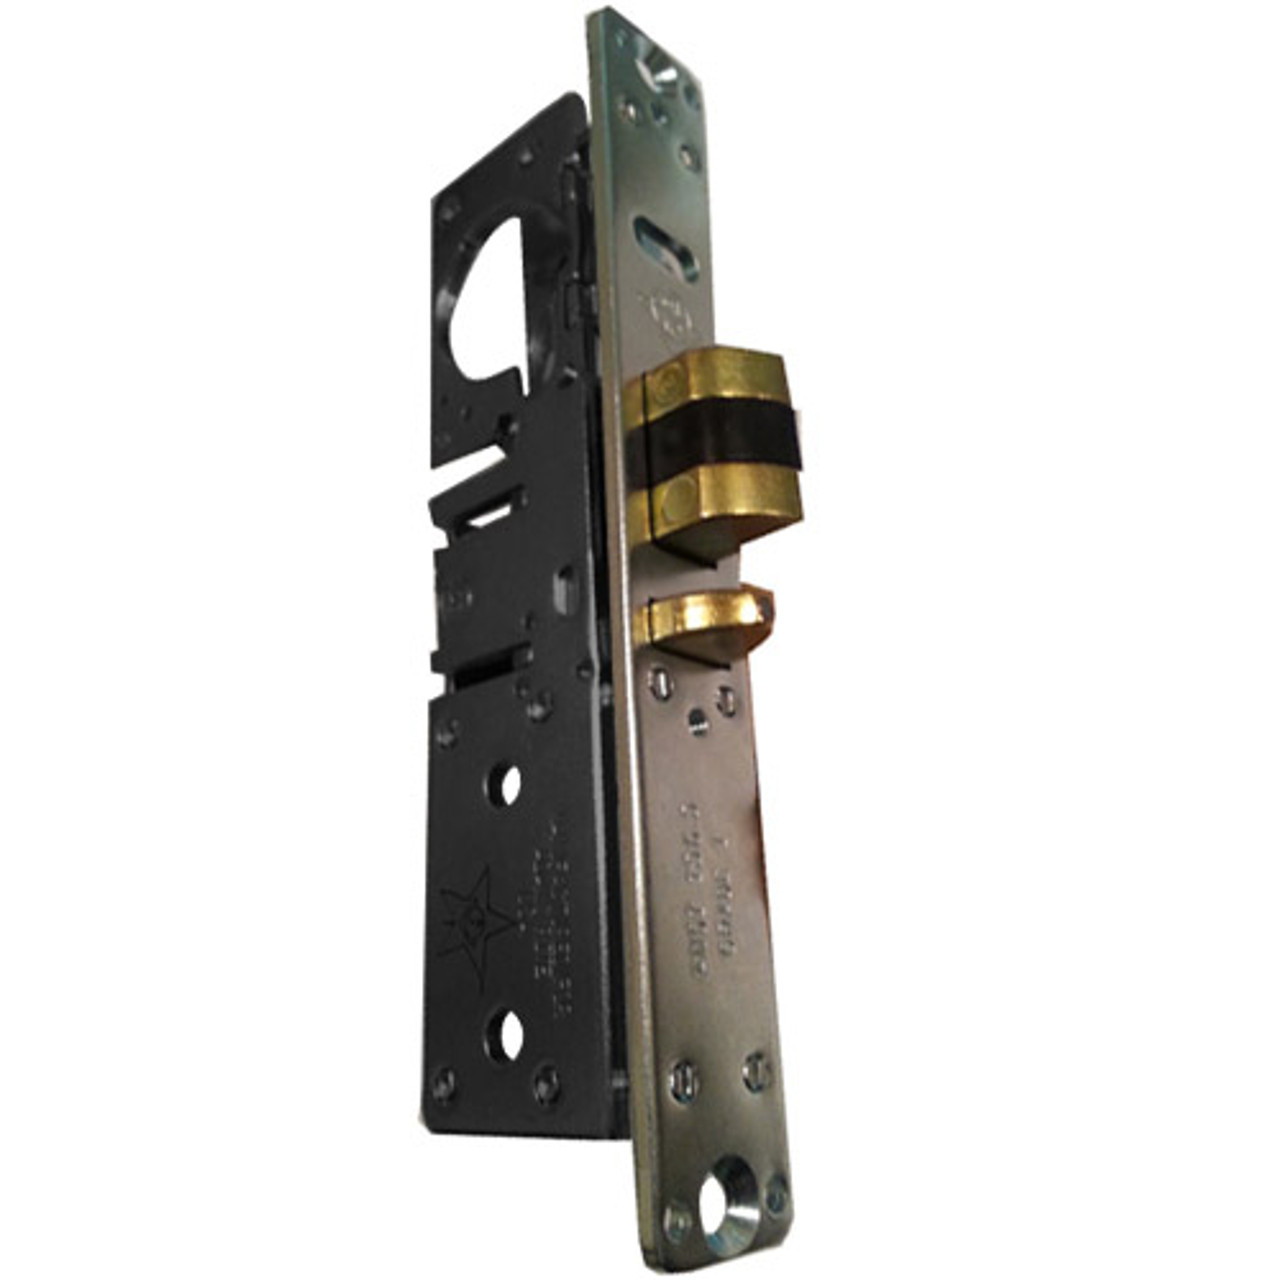 4511W-25-121-335 Adams Rite Standard Deadlatch with Radius Faceplate with weatherstrip in Black Anodized Finish